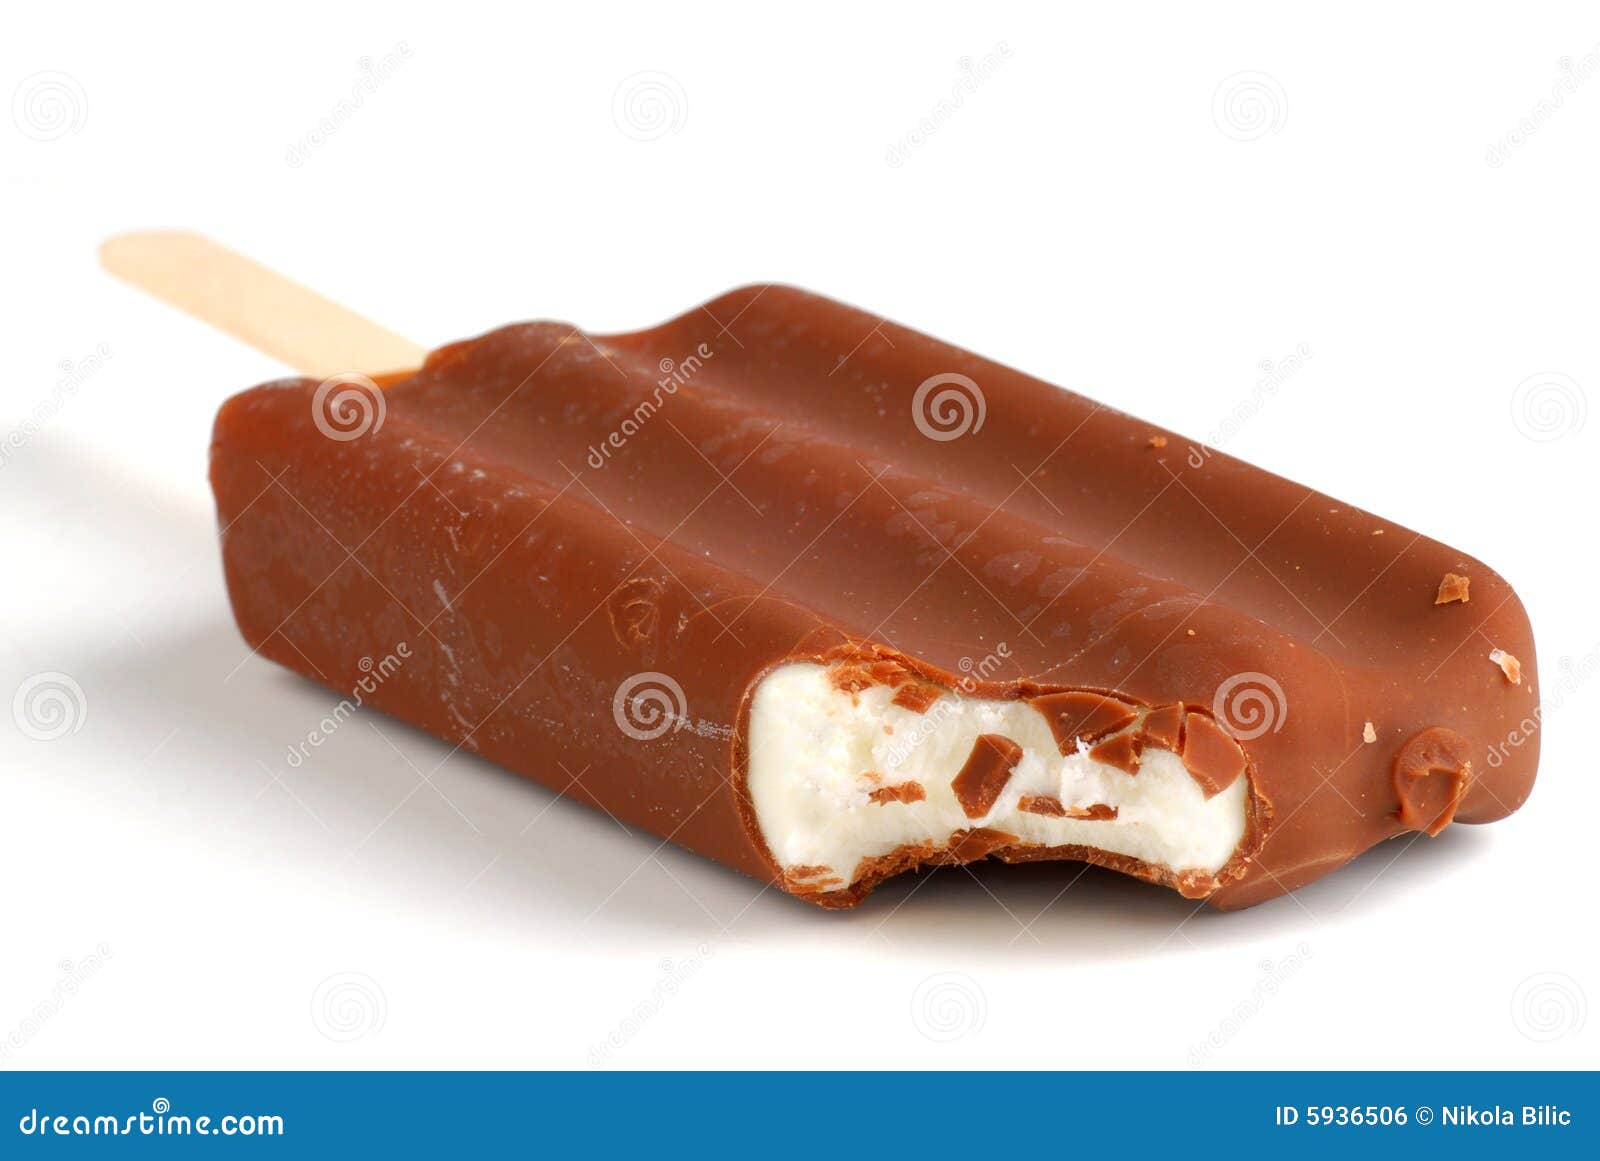 Ice cream bar stock photo. Image of cold, delicious, sweet - 5936506